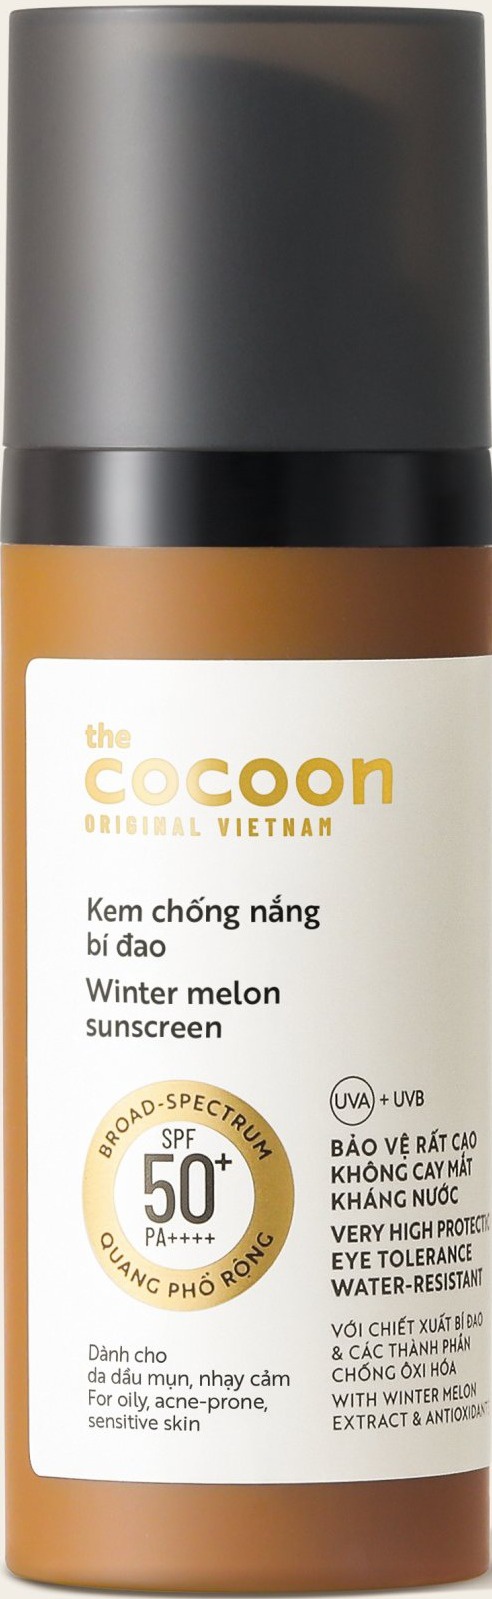 the Cocoon Winter Melon Sunscreen